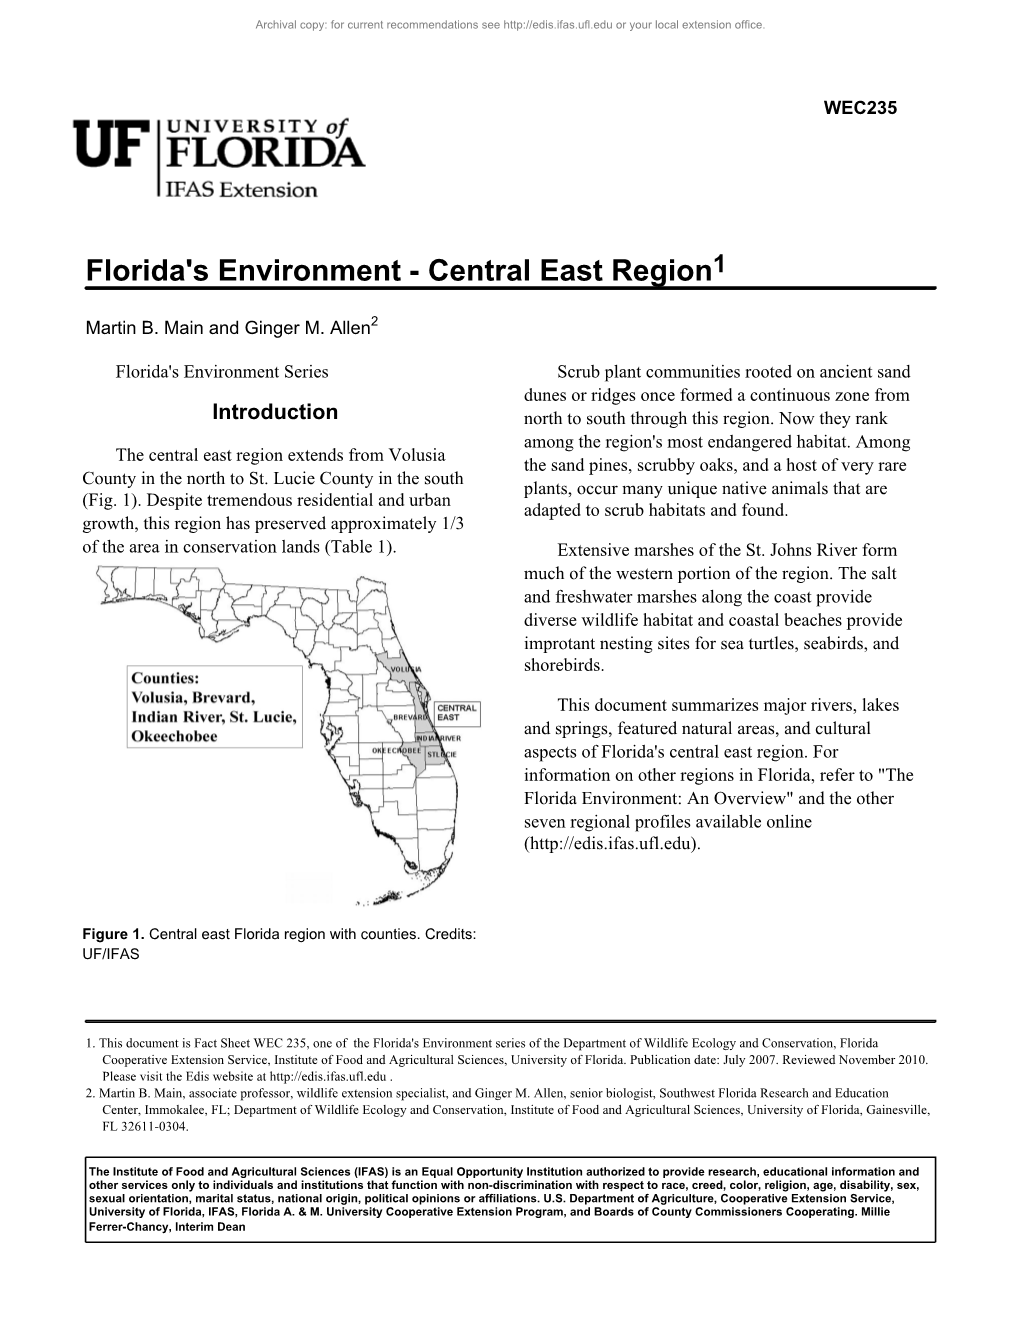 Florida's Environment - Central East Region1